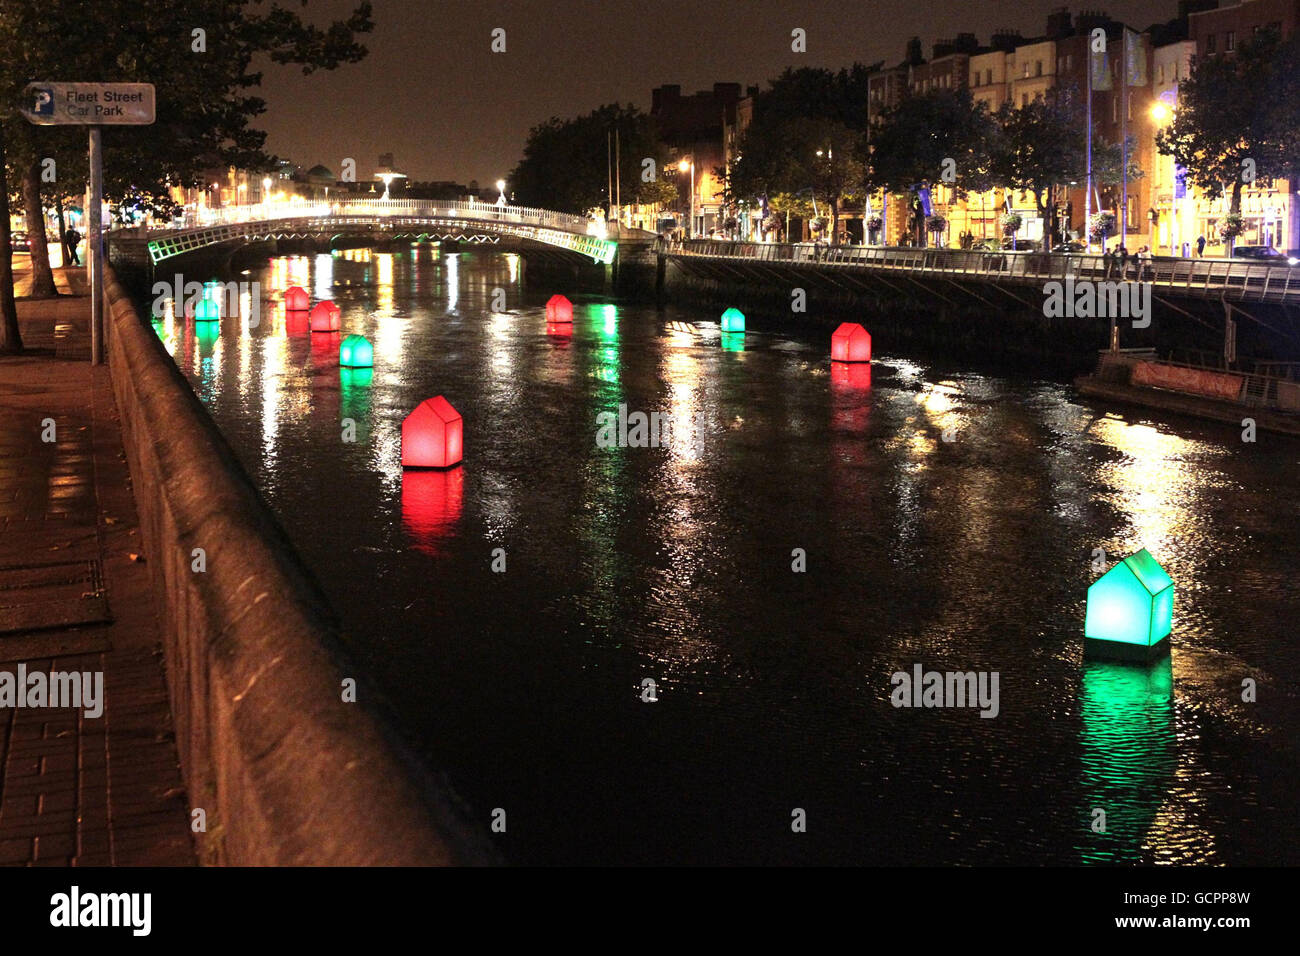 Artist Fergal McCarthy in association with Absolut Fringe brings a public art installation 'Liffeytown' to Dublin's Liffey river of eleven red and green houses. Stock Photo